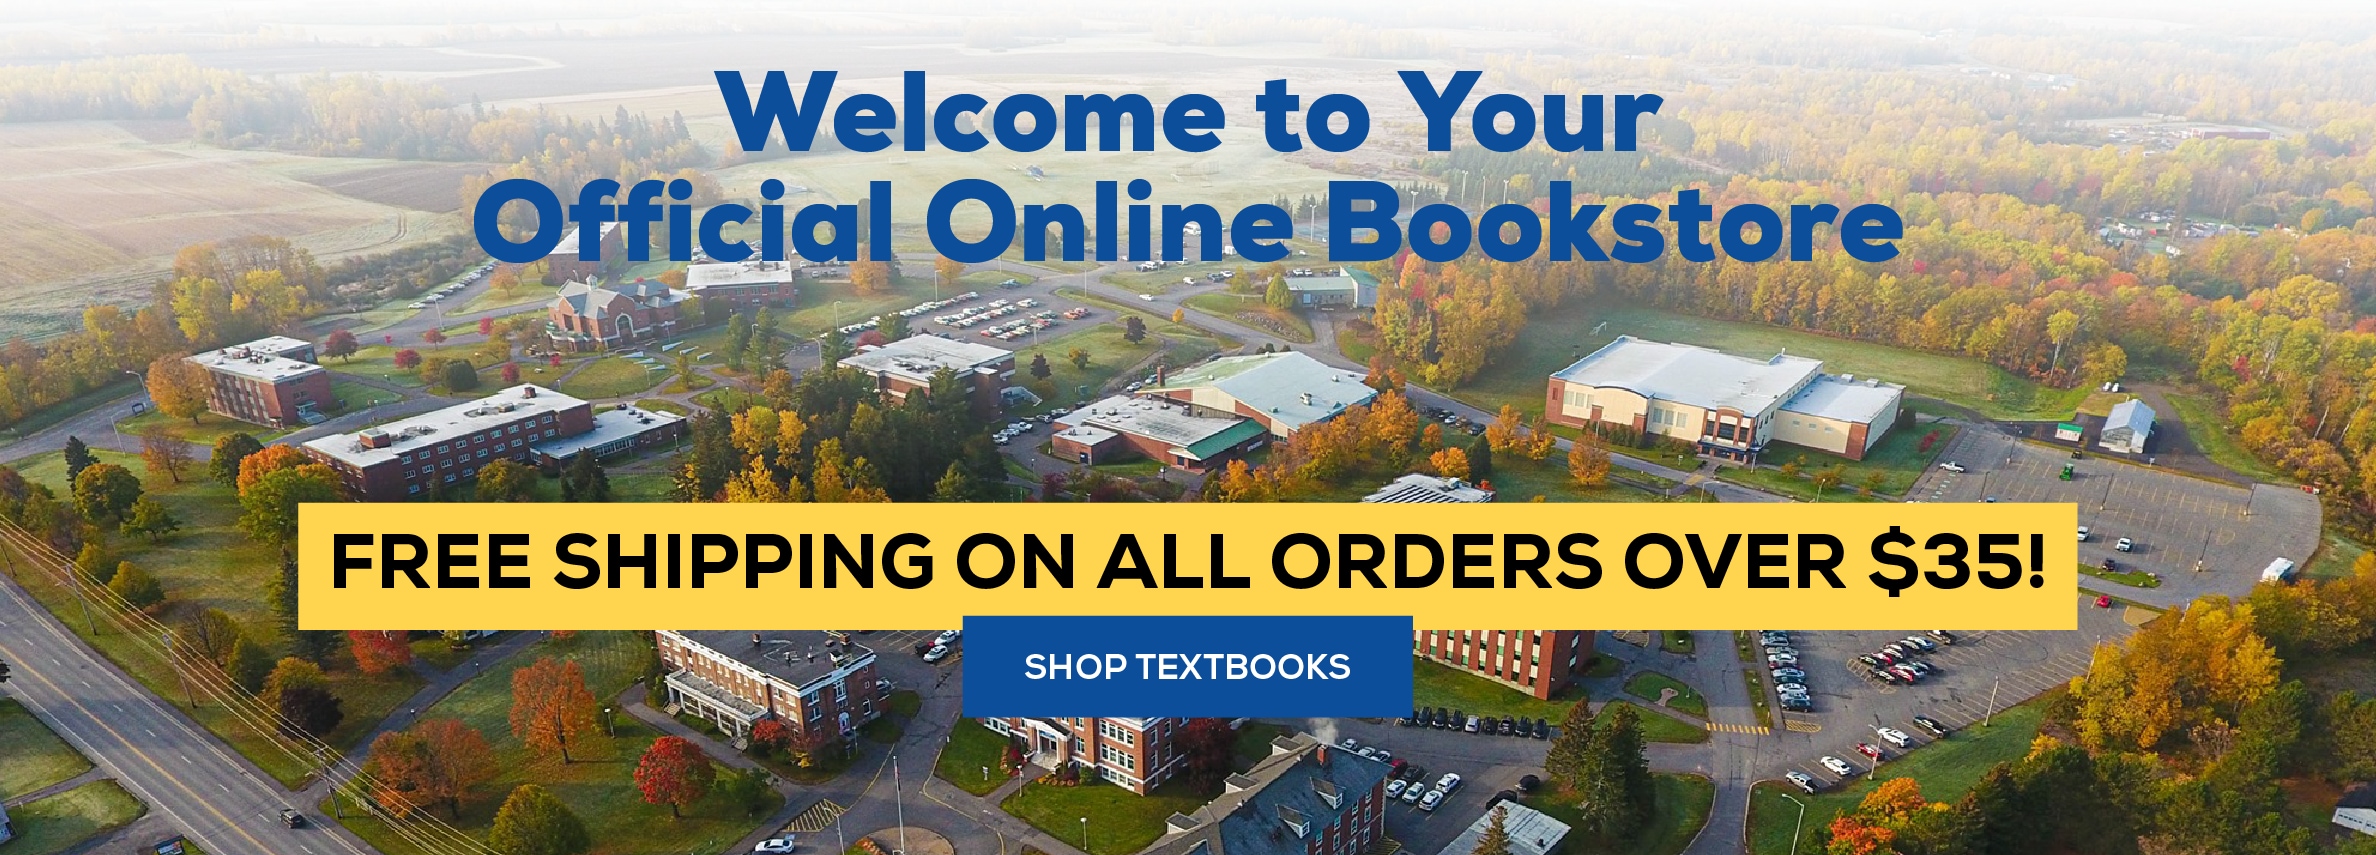 Welcome to your official online bookstore. free shipping on all orders over $35! Shop Textbooks